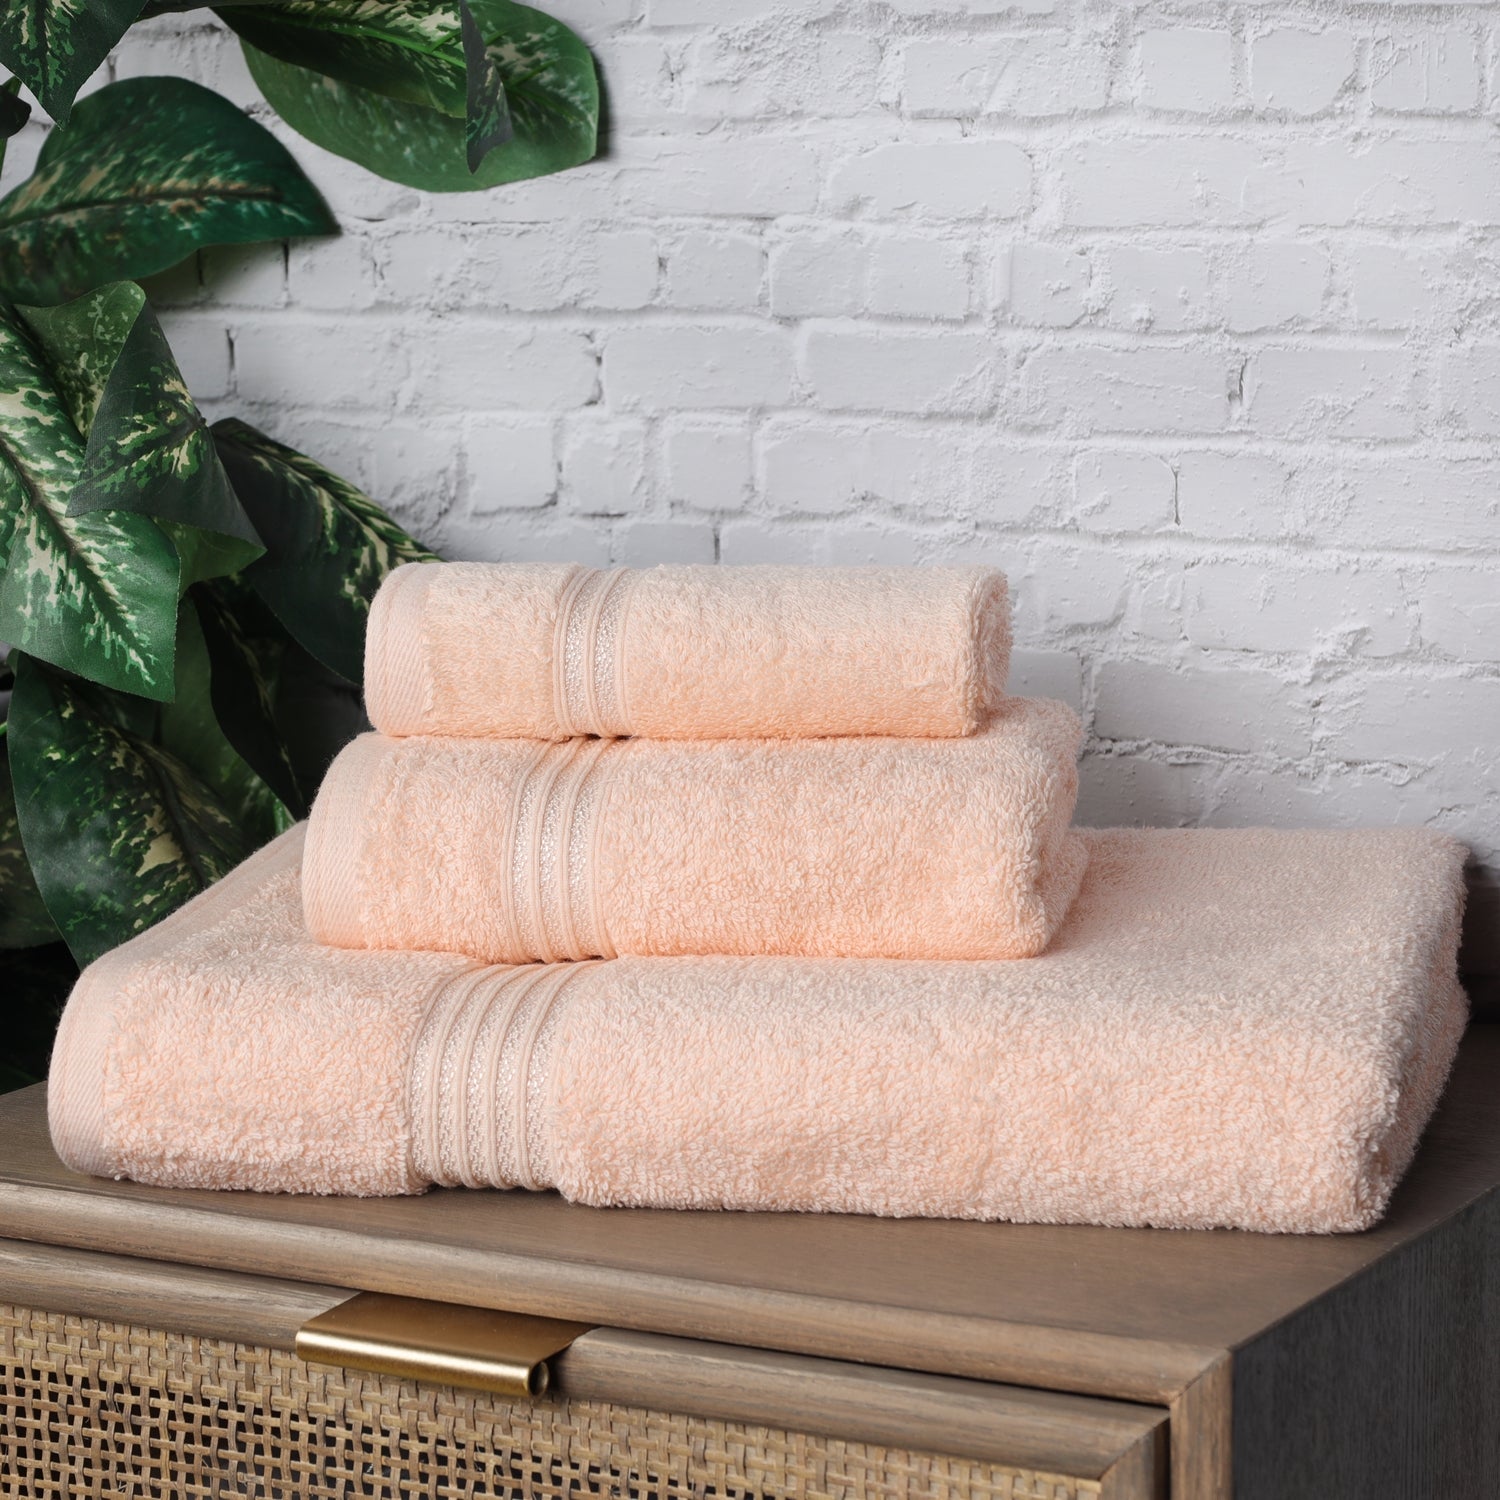 Egyptian Cotton Highly Absorbent Solid Ultra Soft Towel Set - Peach